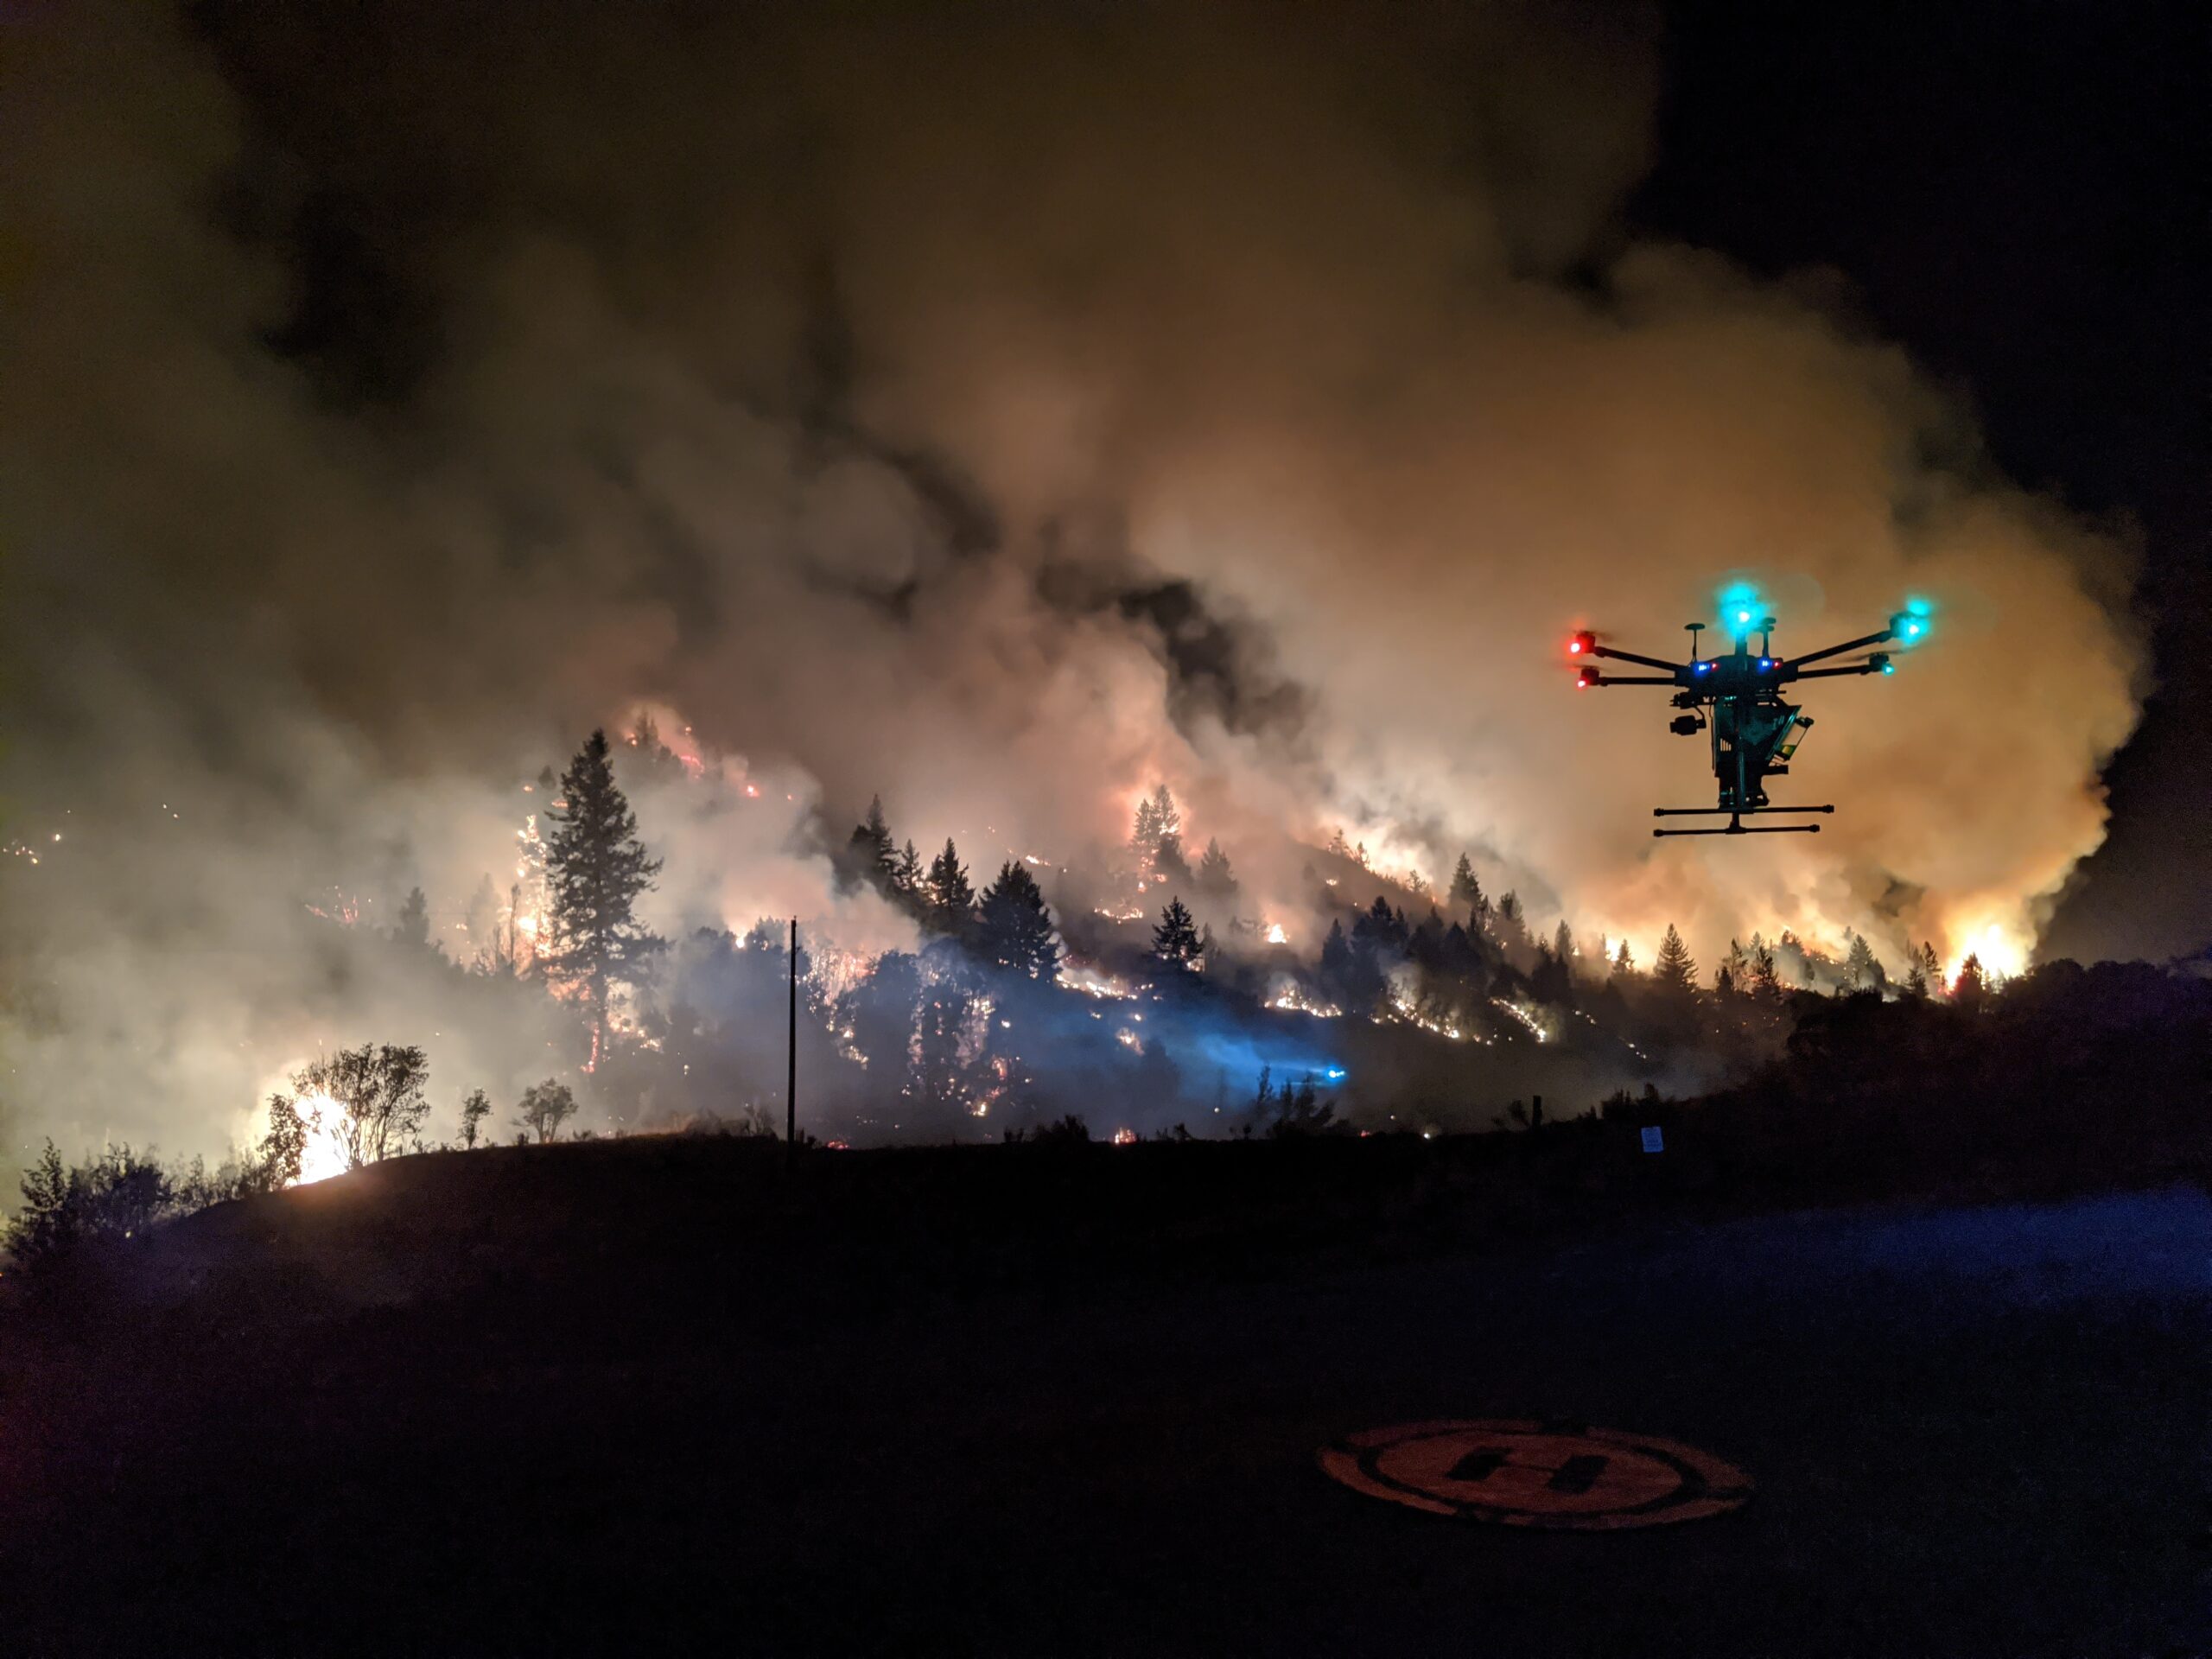 Fighting fire with fire (and drones)